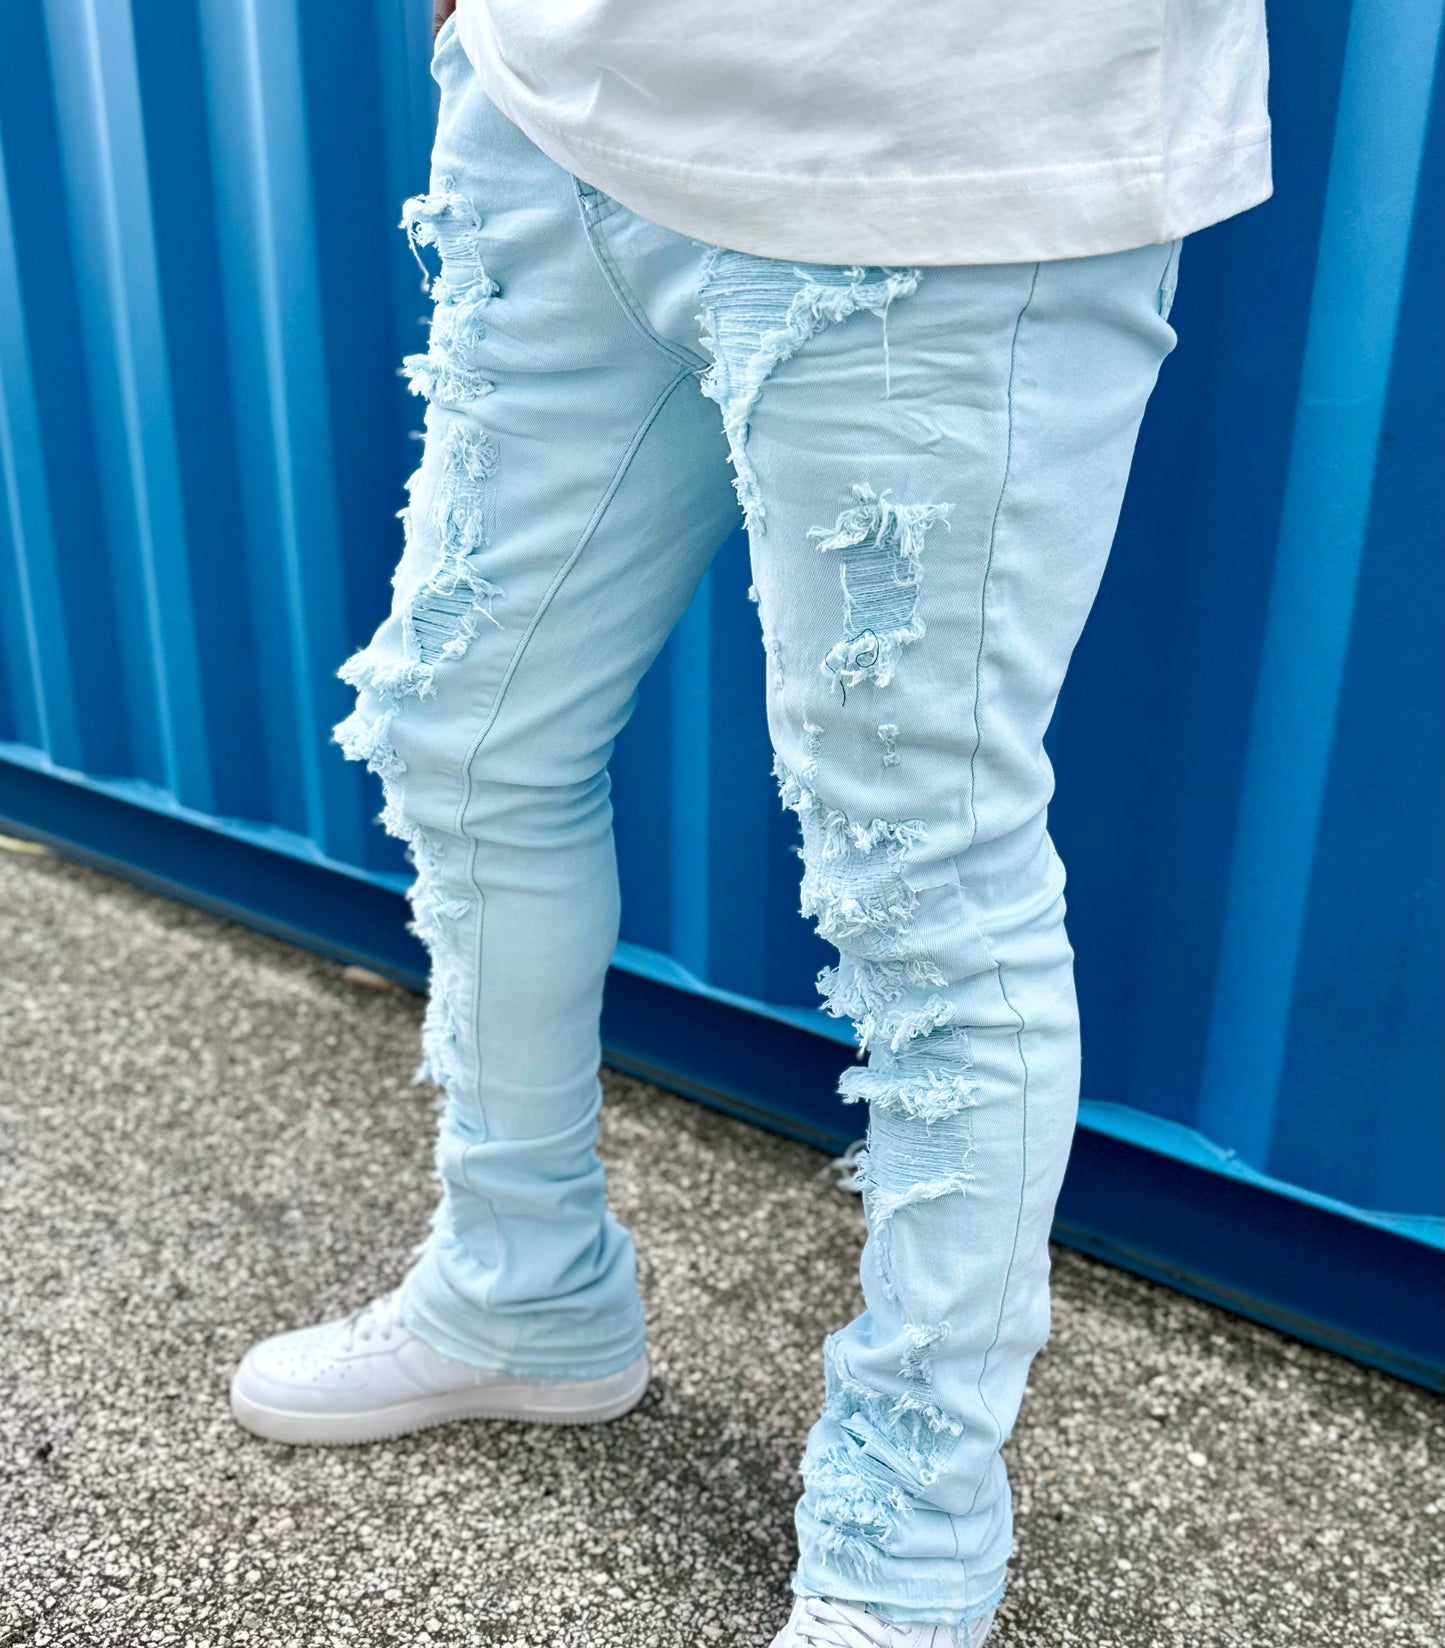 Solid Distressed Stacked Denim (Baby Blue) /C?